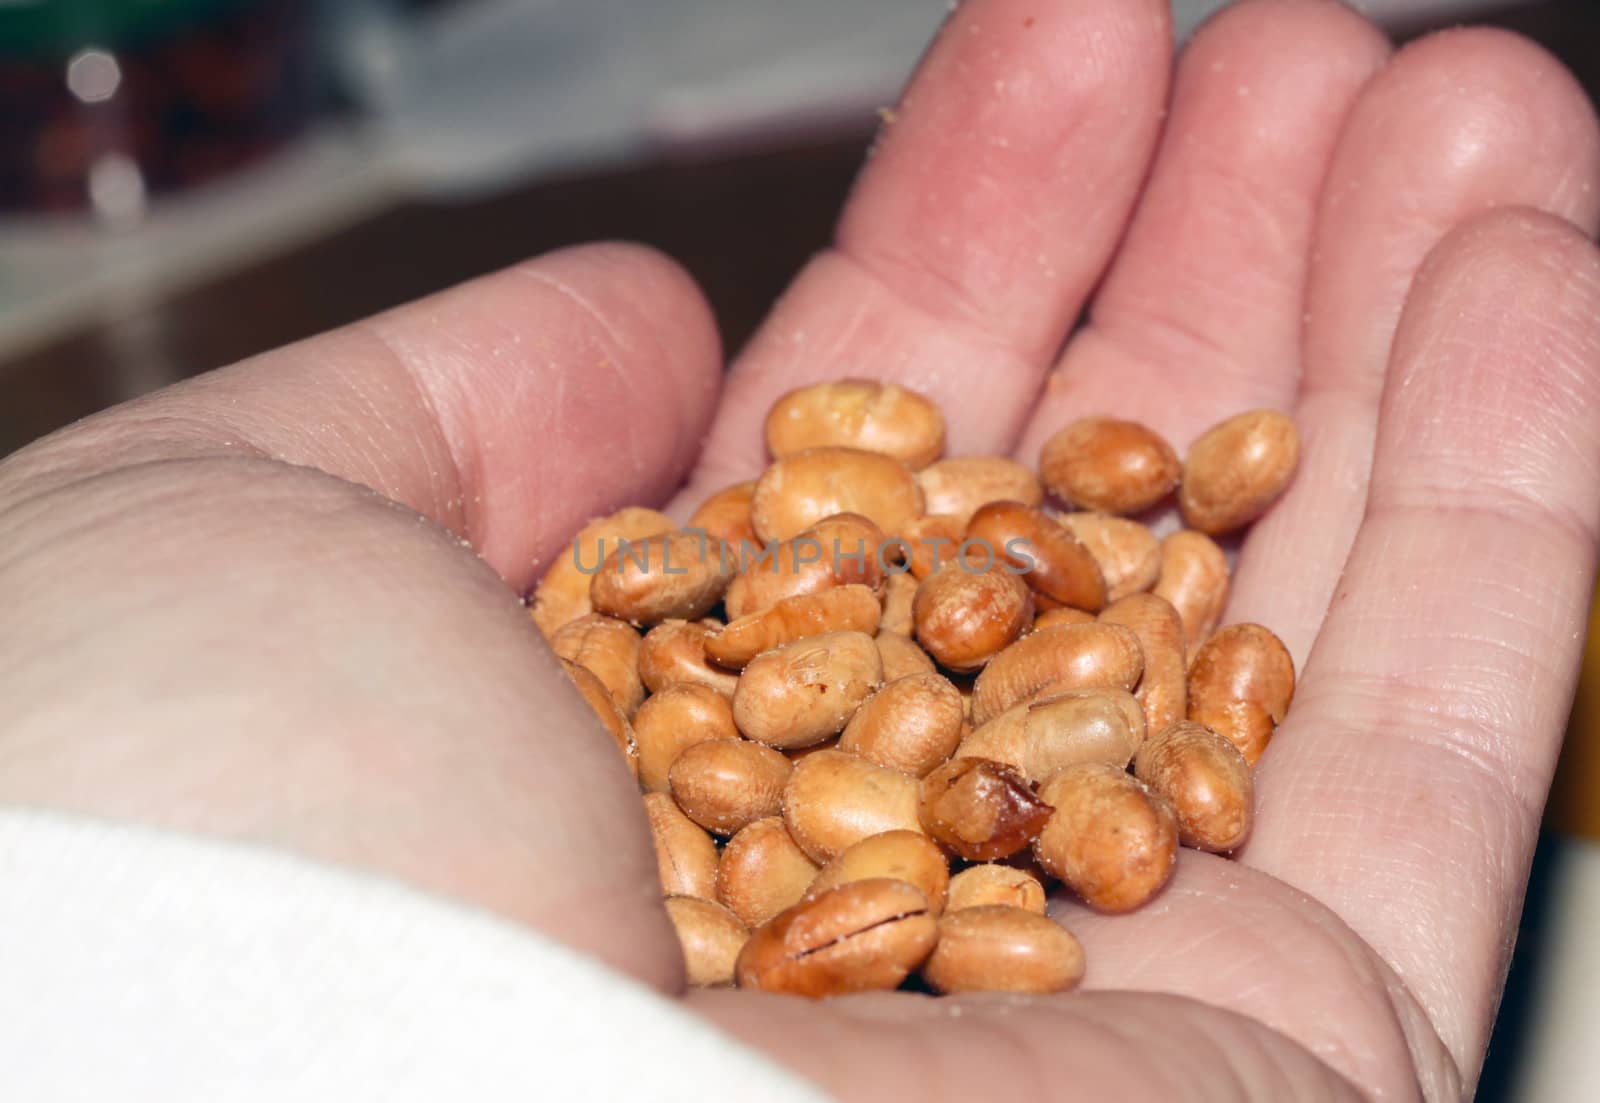 Soynuts in a hand